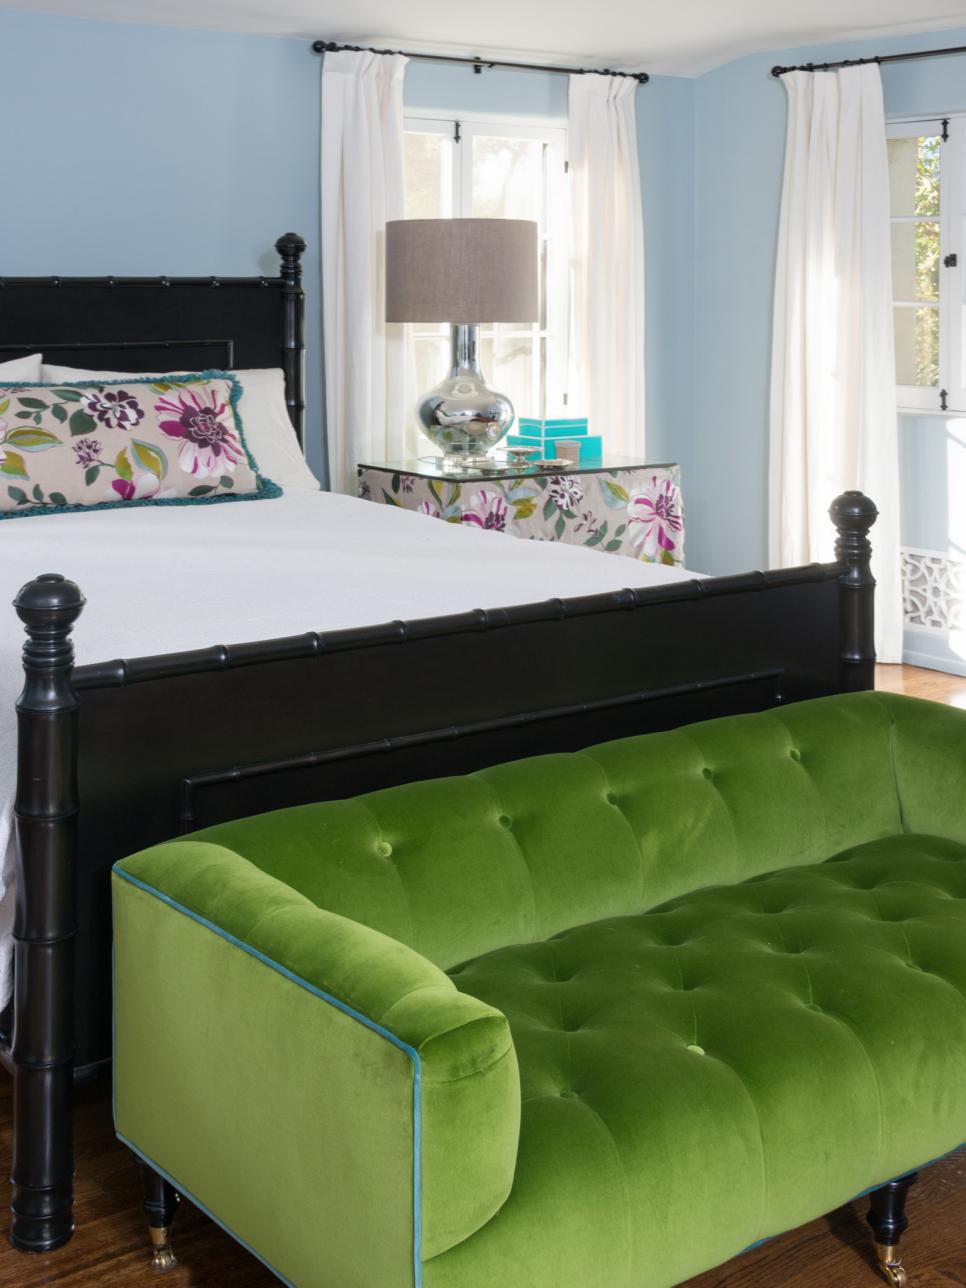 Bedroom With Florals and Pop of Green